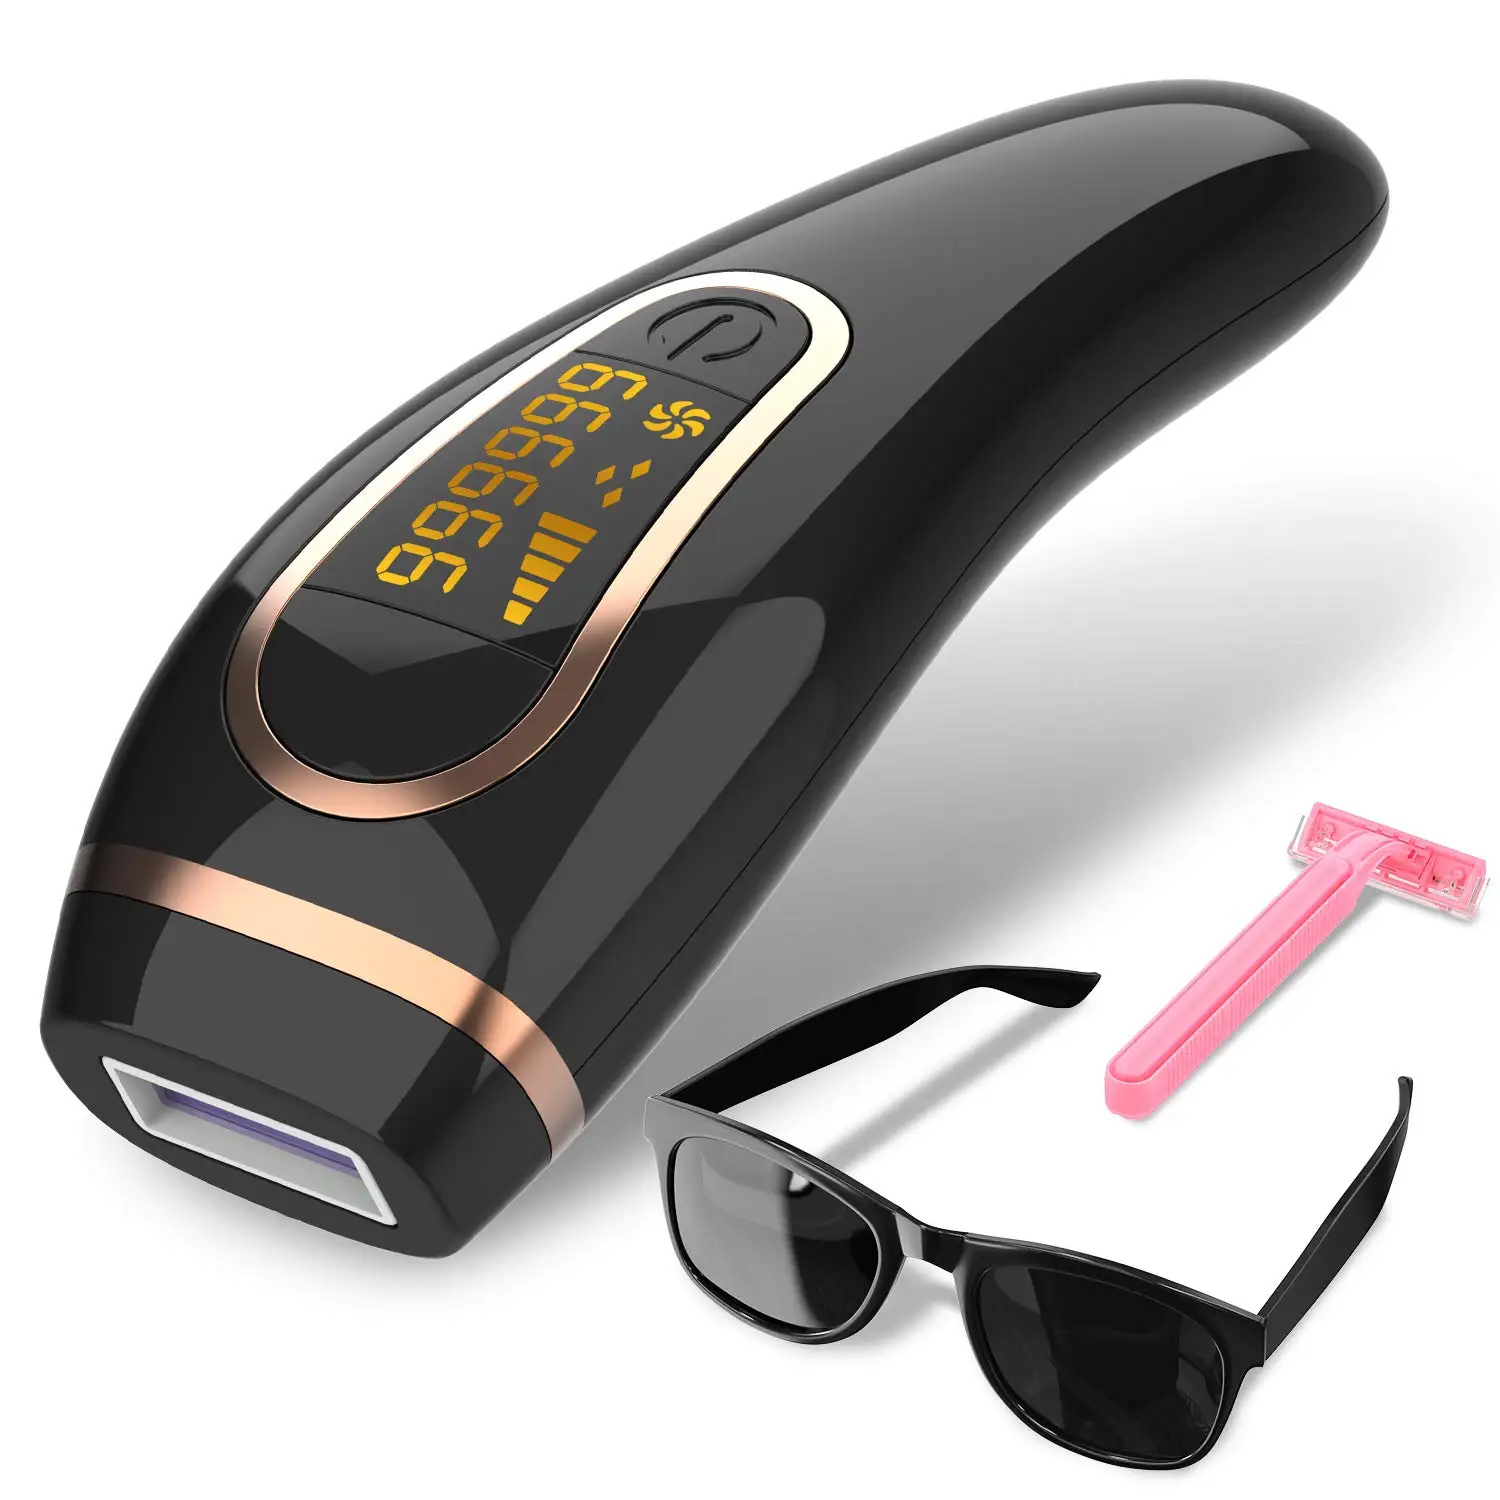 

amazon hot sale IPL Hair Removal Permanent Painless Laser Portable Hair Remover Device for Women and Man 999,999 Flashes, White black